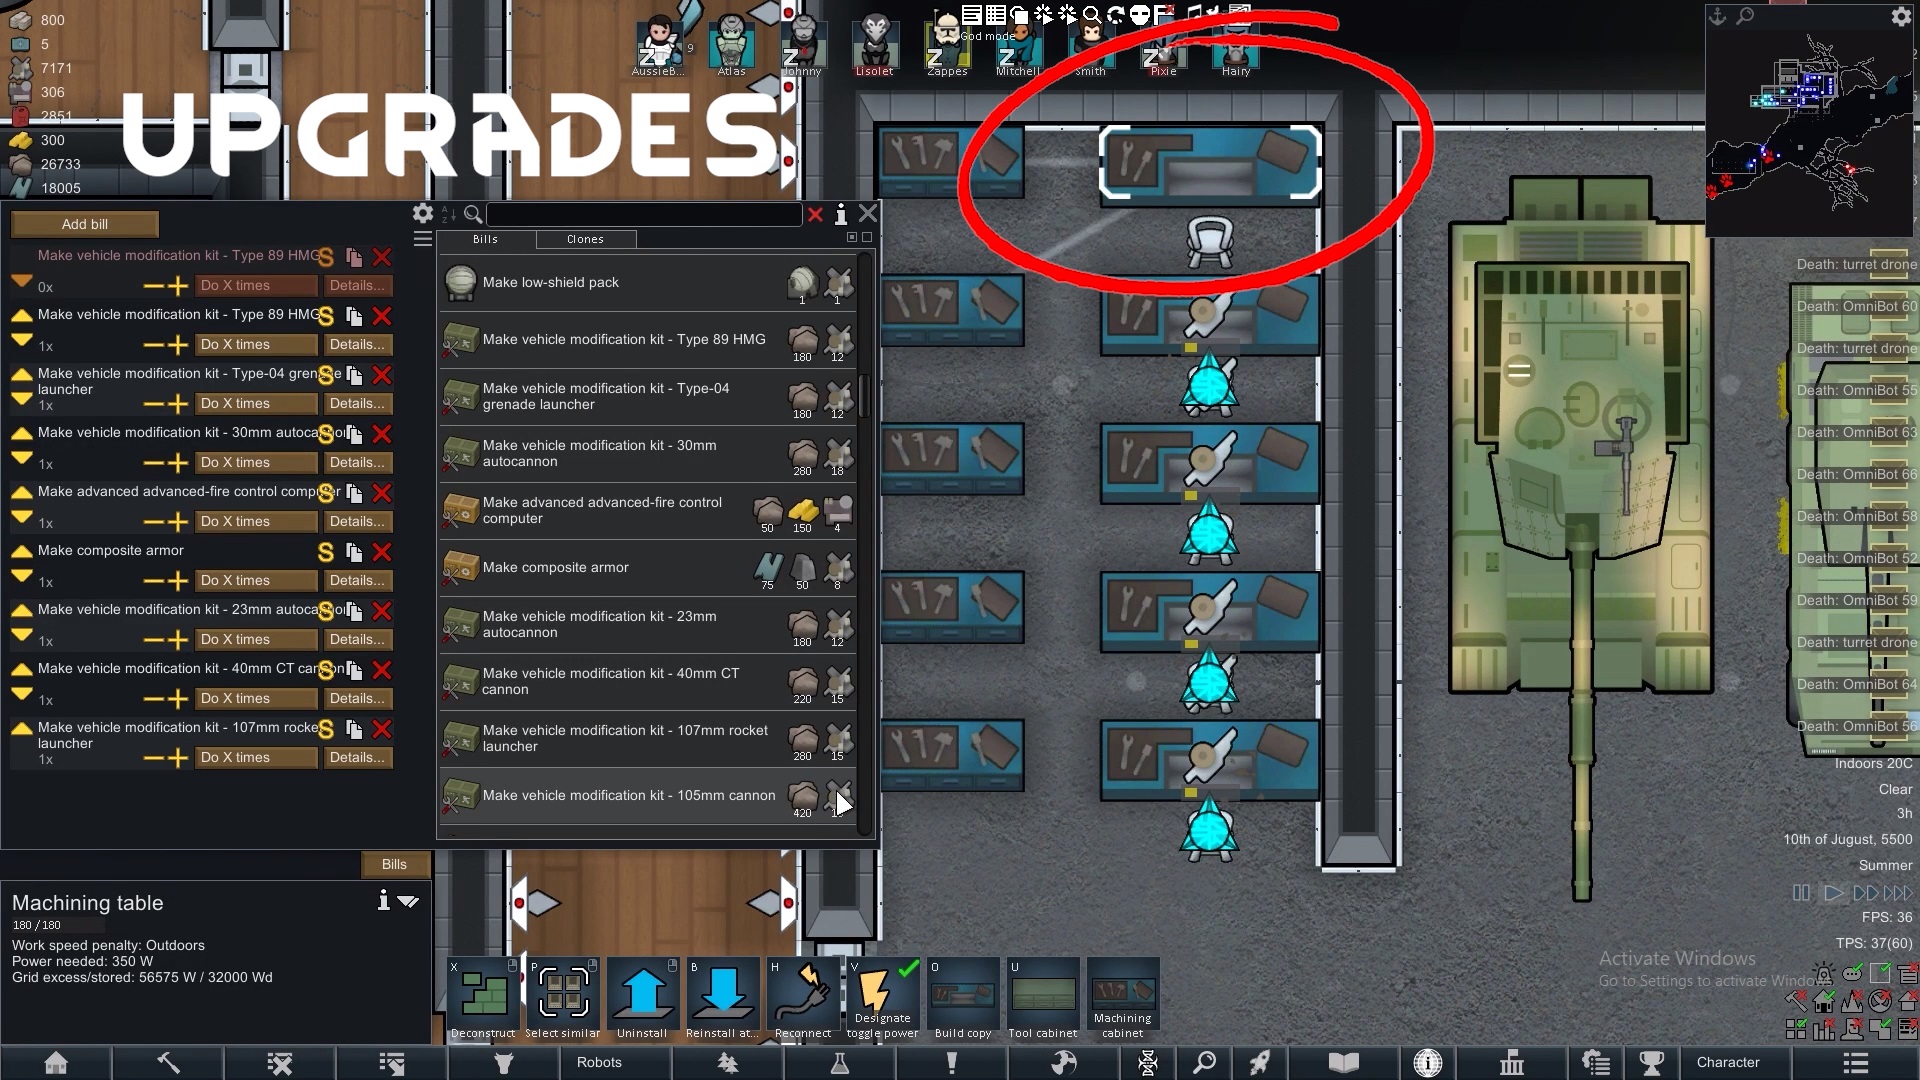 RimWorld How to Add Vehicles Mod Tutorial Guide - Upgrades - D3801B7